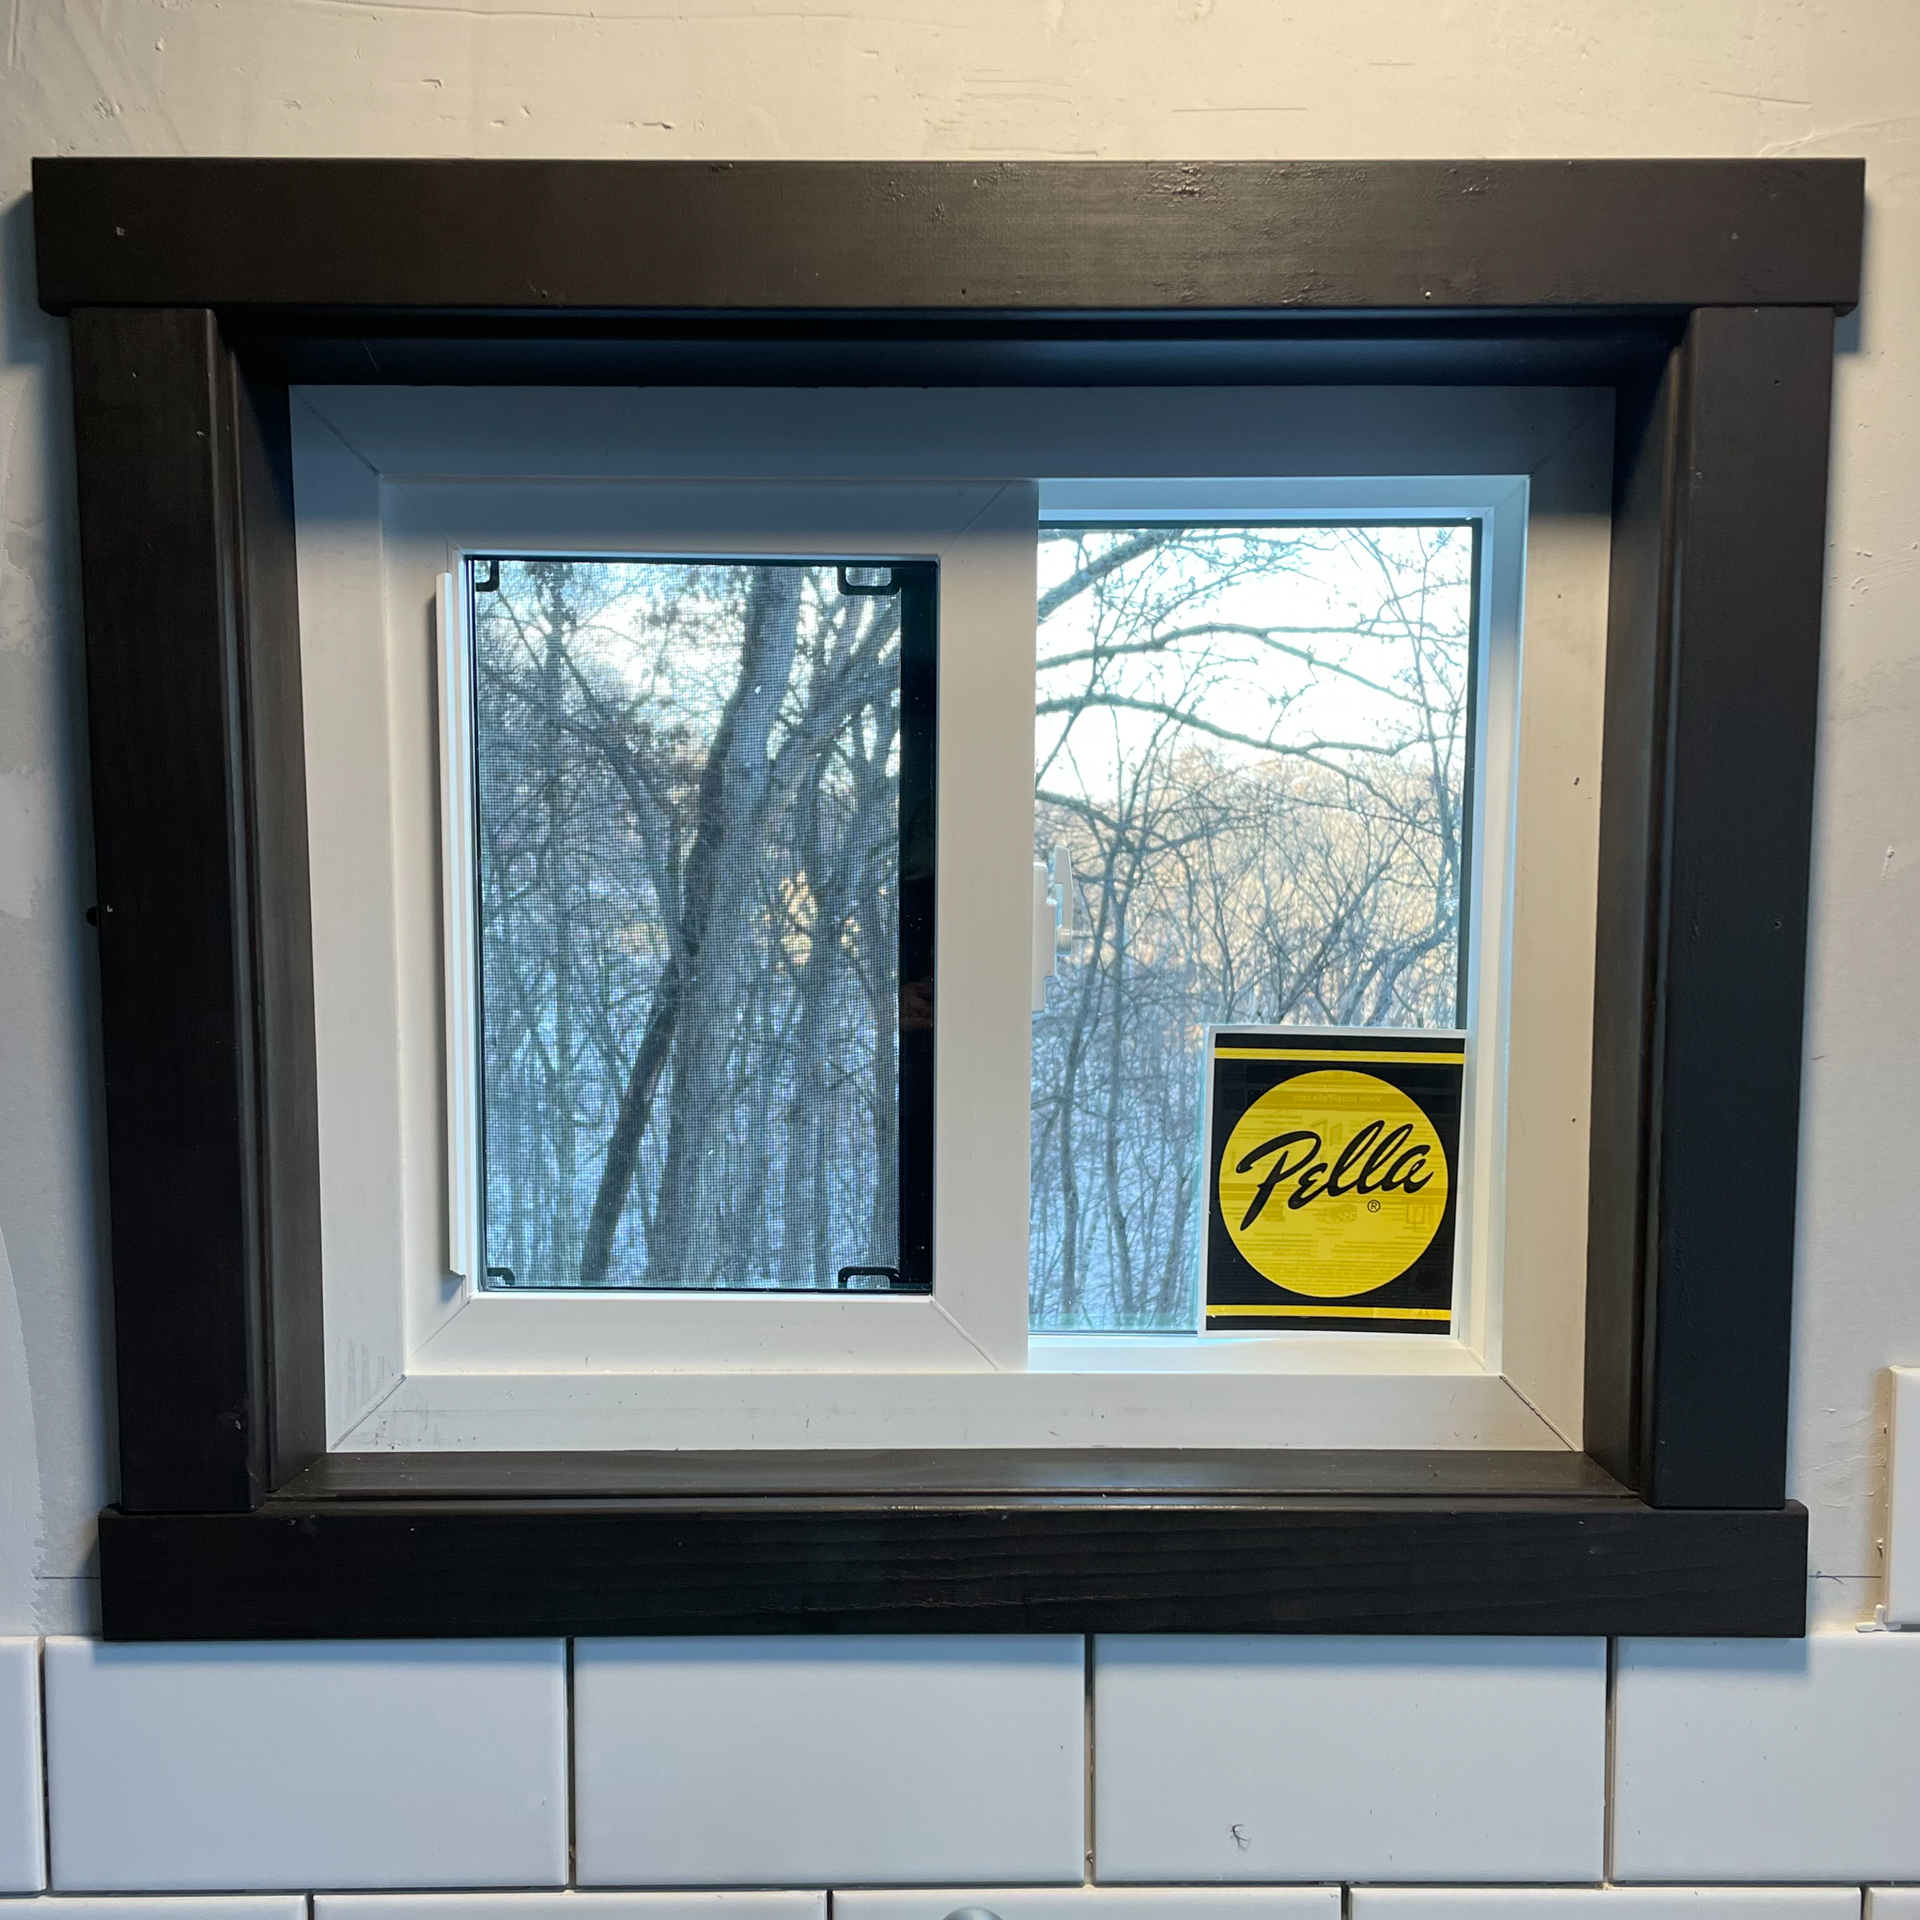 New Pella Window installed by Rivers Edge Remodels